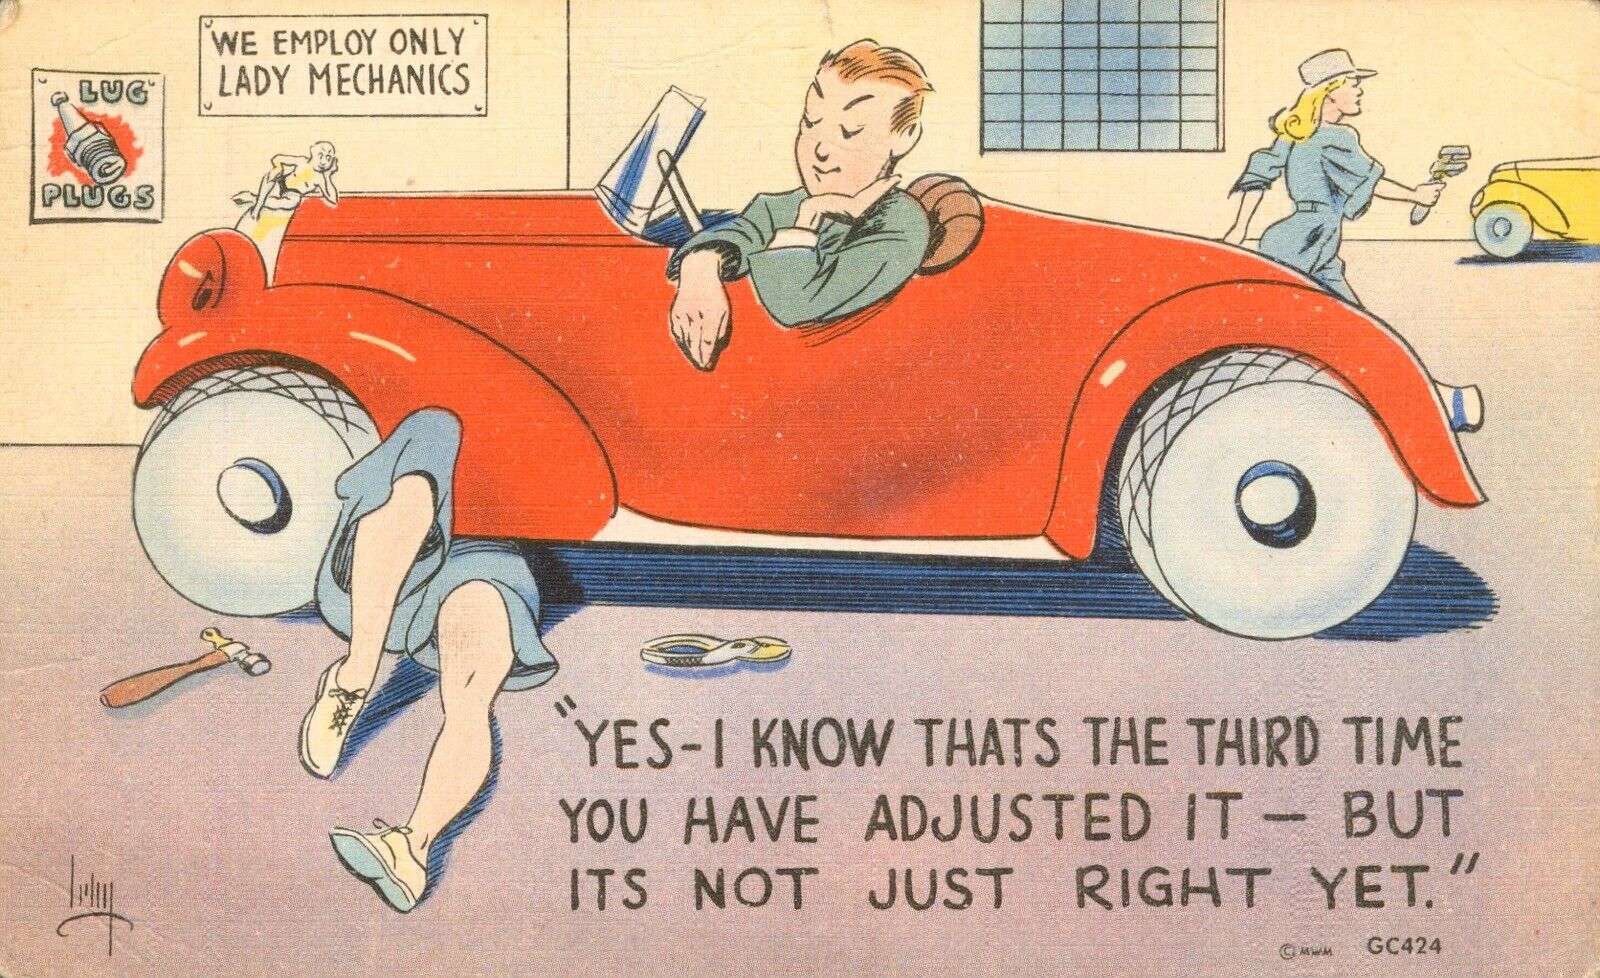 1950 Vintage Humor POSTCARD “We Employ Only Lady Mechanics” Chauvinist Male 